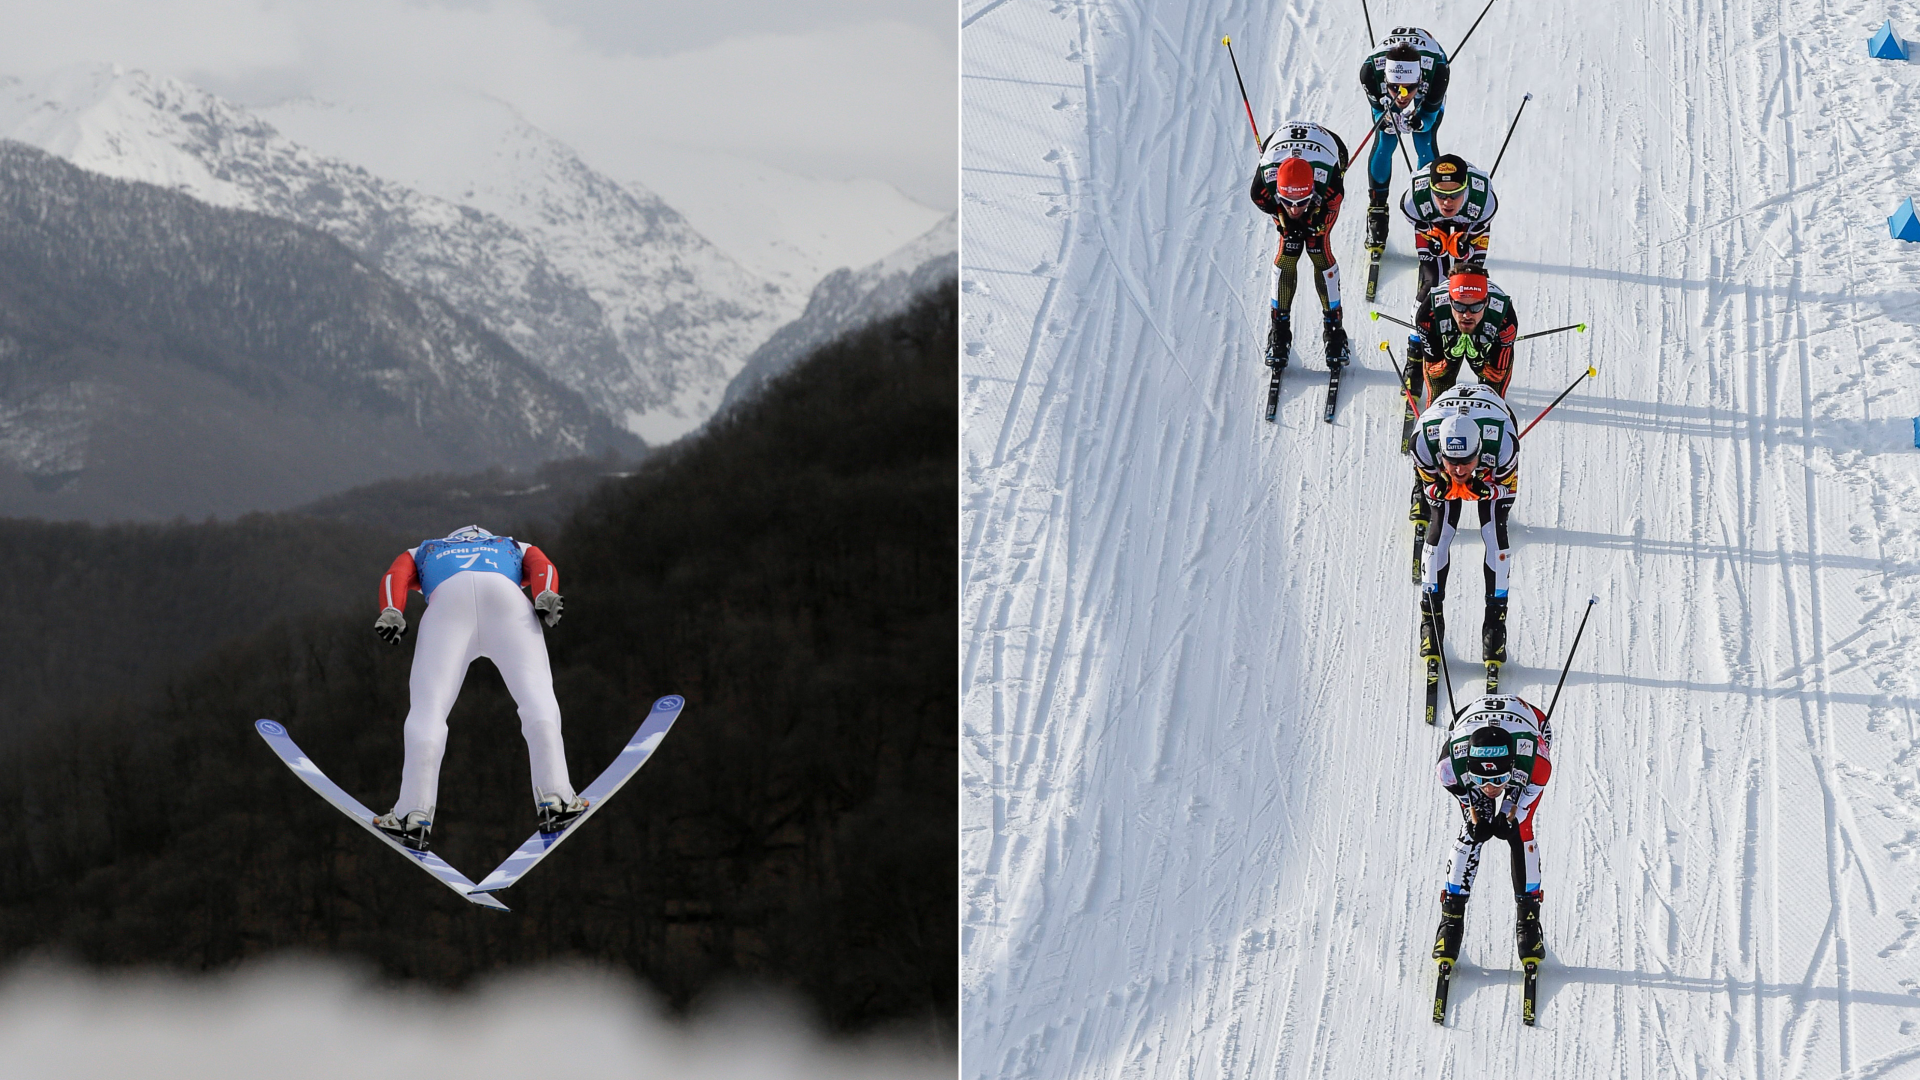 Nordic combined